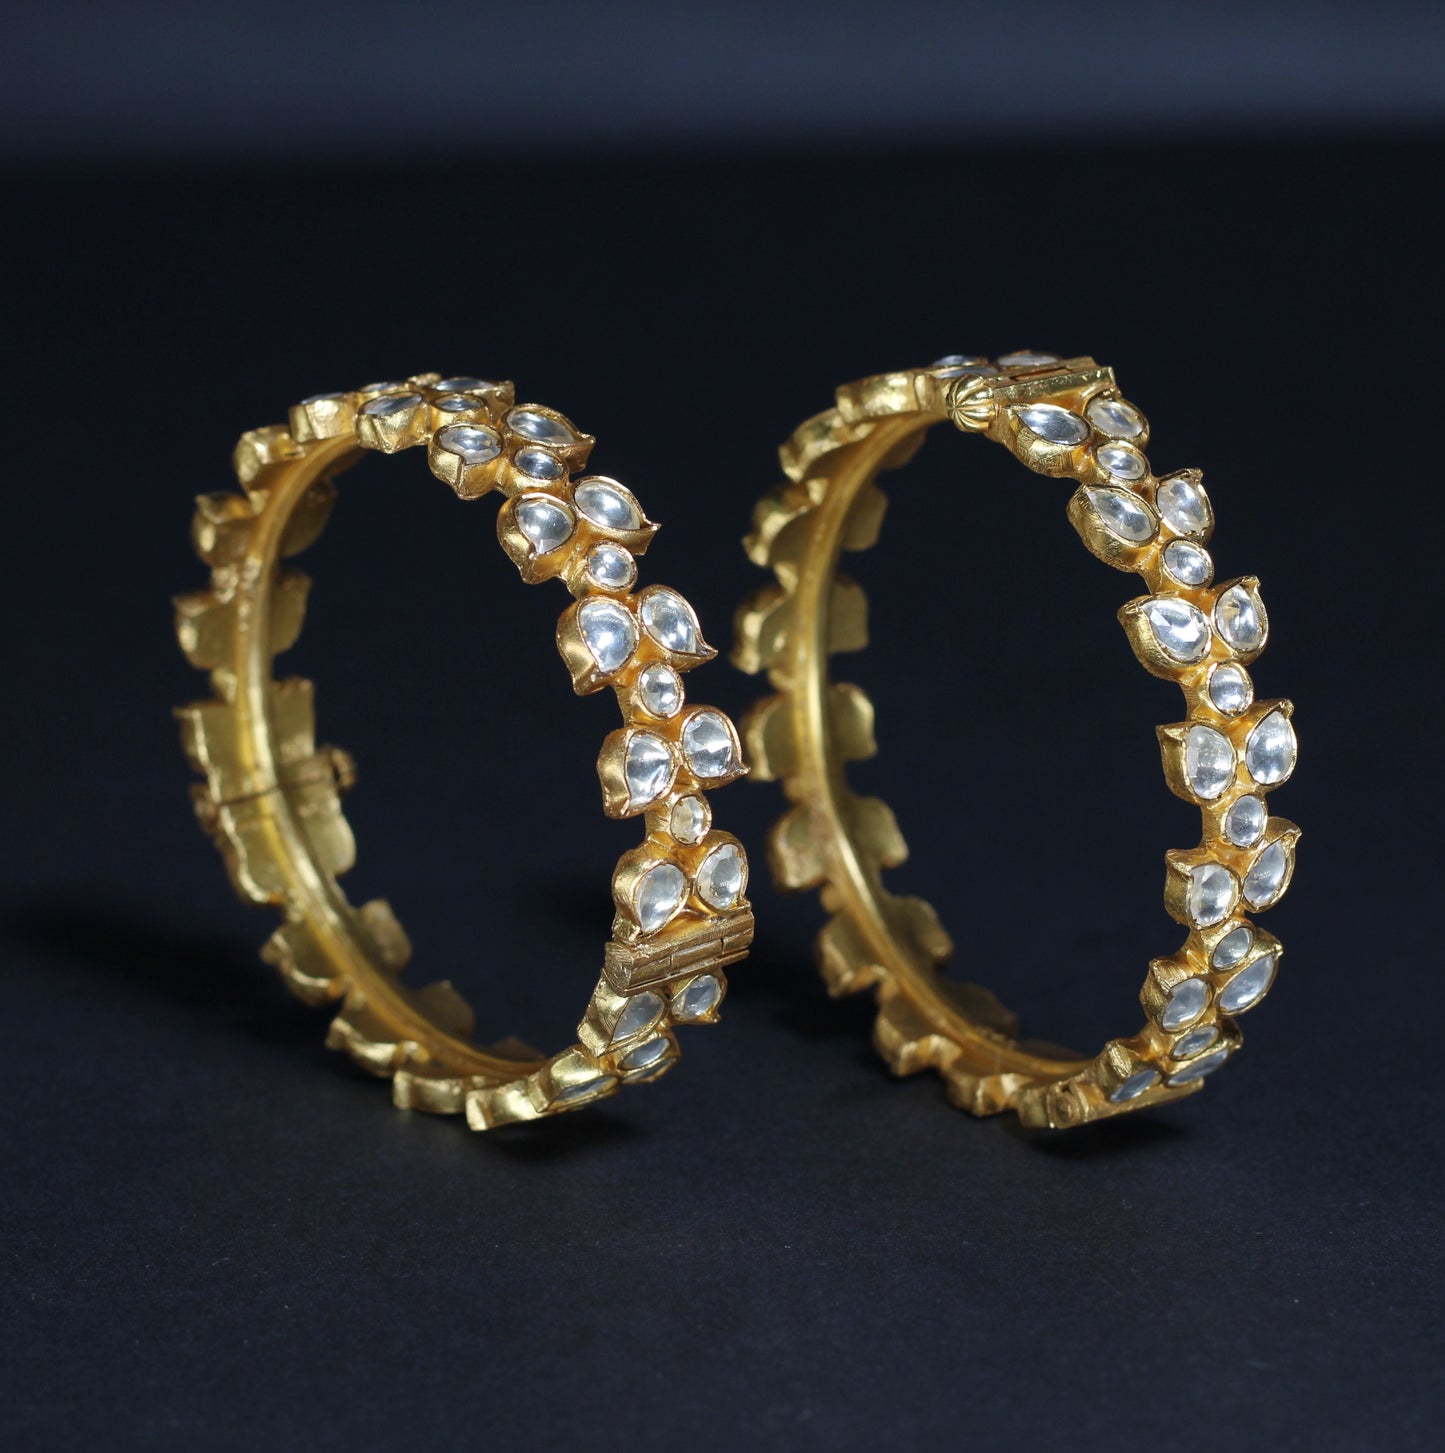 EACH BANGLE IS IN 92.5 STERLING SILVER  AND 18KT GOLD PLATED WITH KUNDAN